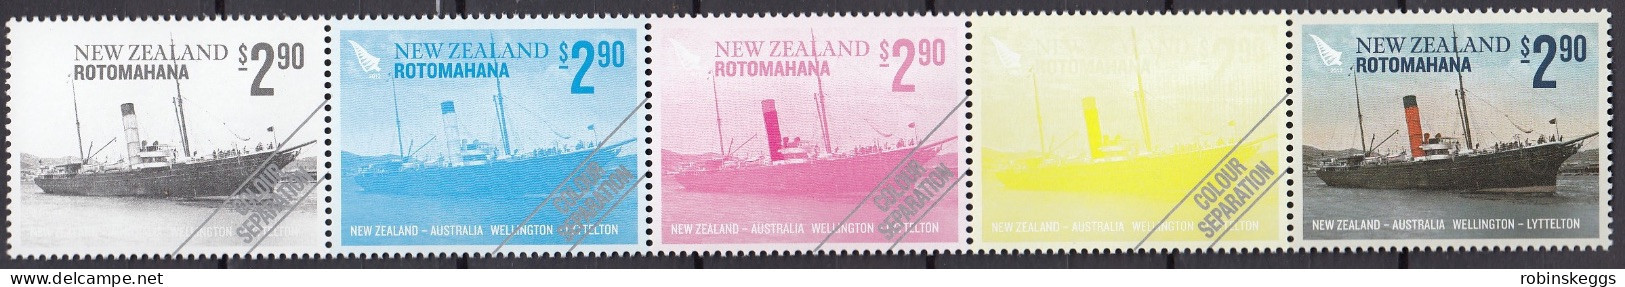 NEW ZEALAND 2012 Great Voyages Of NZ, $2.90 Colour Separation Proof MNH - Barcos